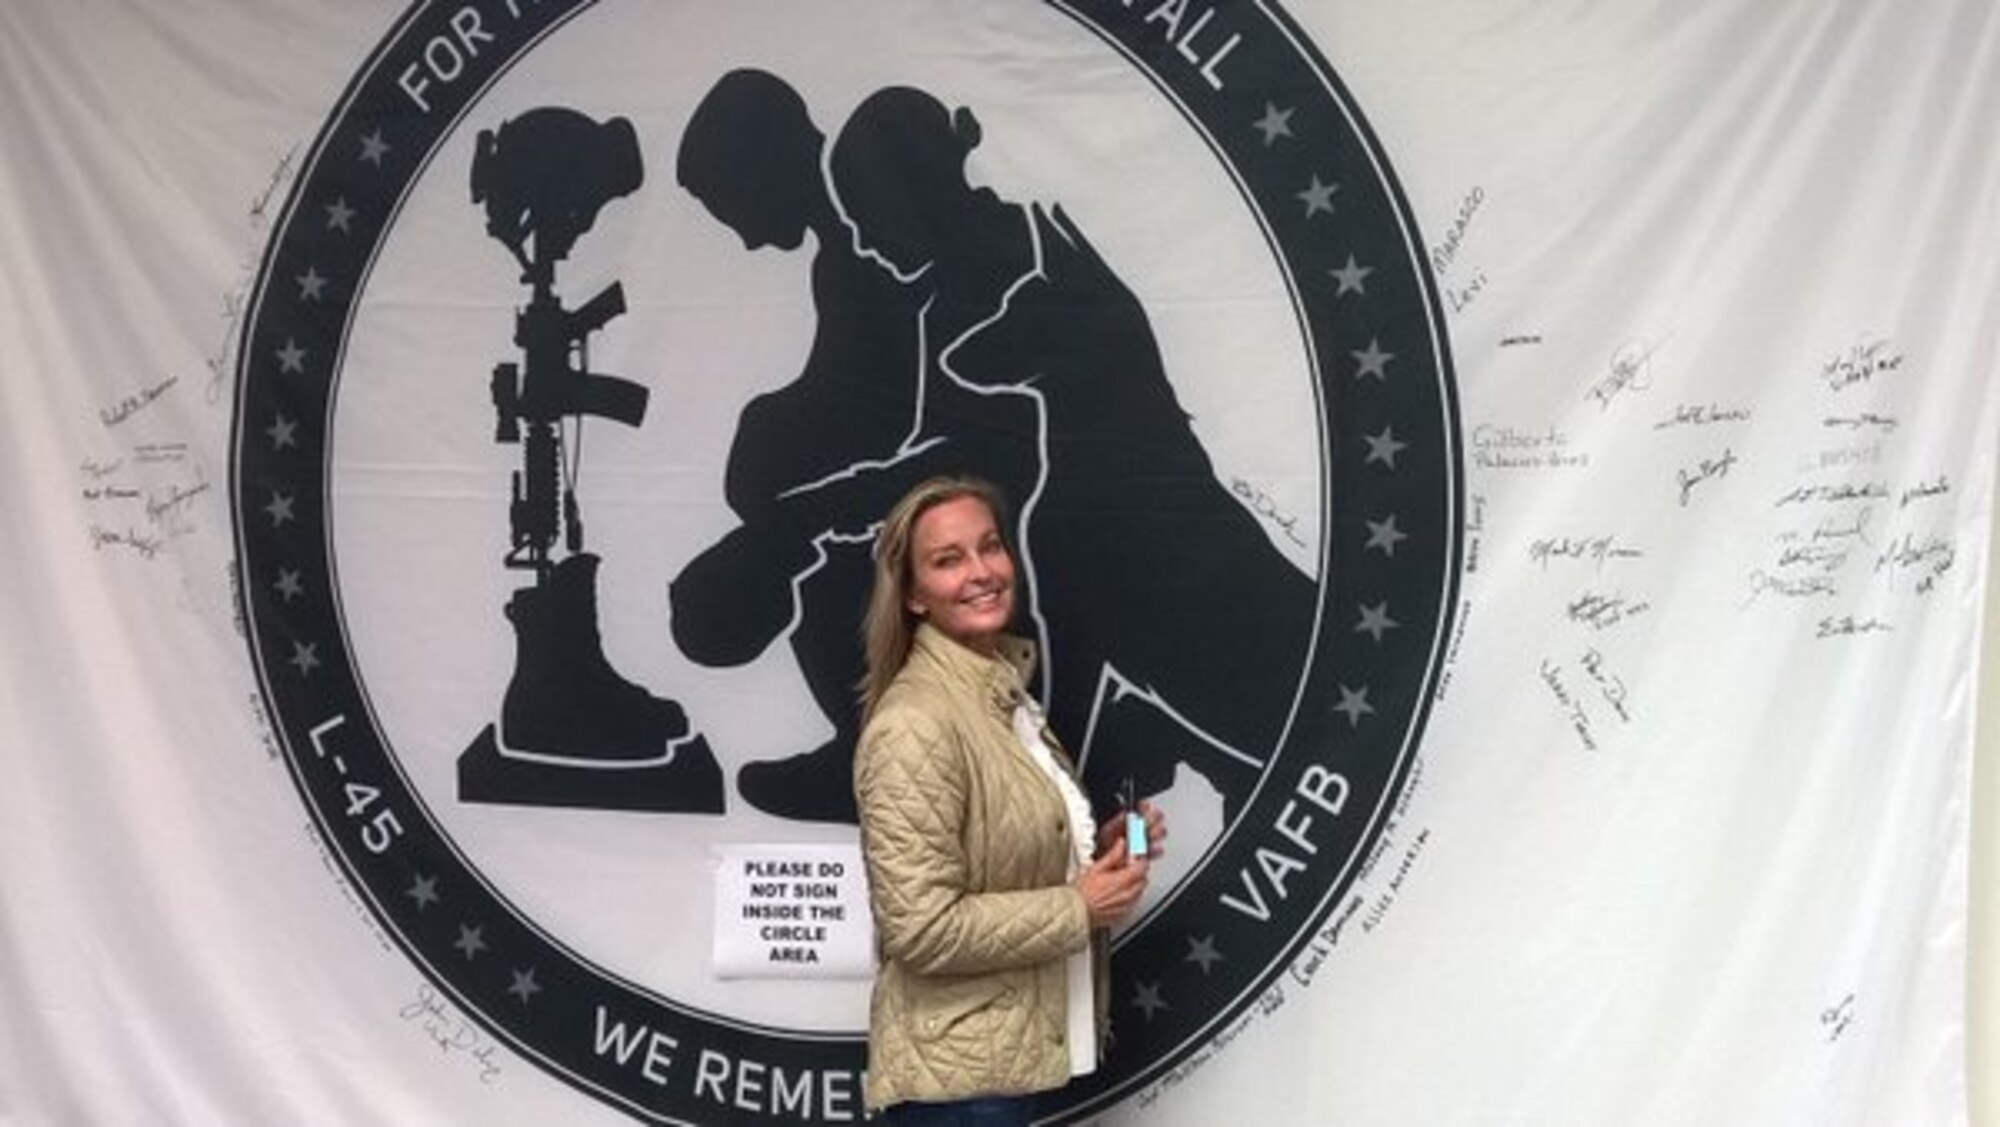 Actress Bo Derek, a self-proclaimed local Vandenberg AFB girl, signs a banner for the NROL-45 satellite during a recent visit to the base. The mission's emblem on the payload fairing featured the silhouette of a military working dog sitting beside two soldiers kneeling at a memorial to a fallen comrade and the line, For those who have given all, we remember. A United Launch Alliance Delta IV Medium+ (5,2) rocket successfully delivered a satellite, designated NROL-45, to orbit for the National Reconnaissance Office after lifting off at 3:40 a.m. PST Feb. 10, 2016 from Space Launch Complex-6 at Vandenberg Air Force Base, located on California's Central Coast. (Courtesy photo)